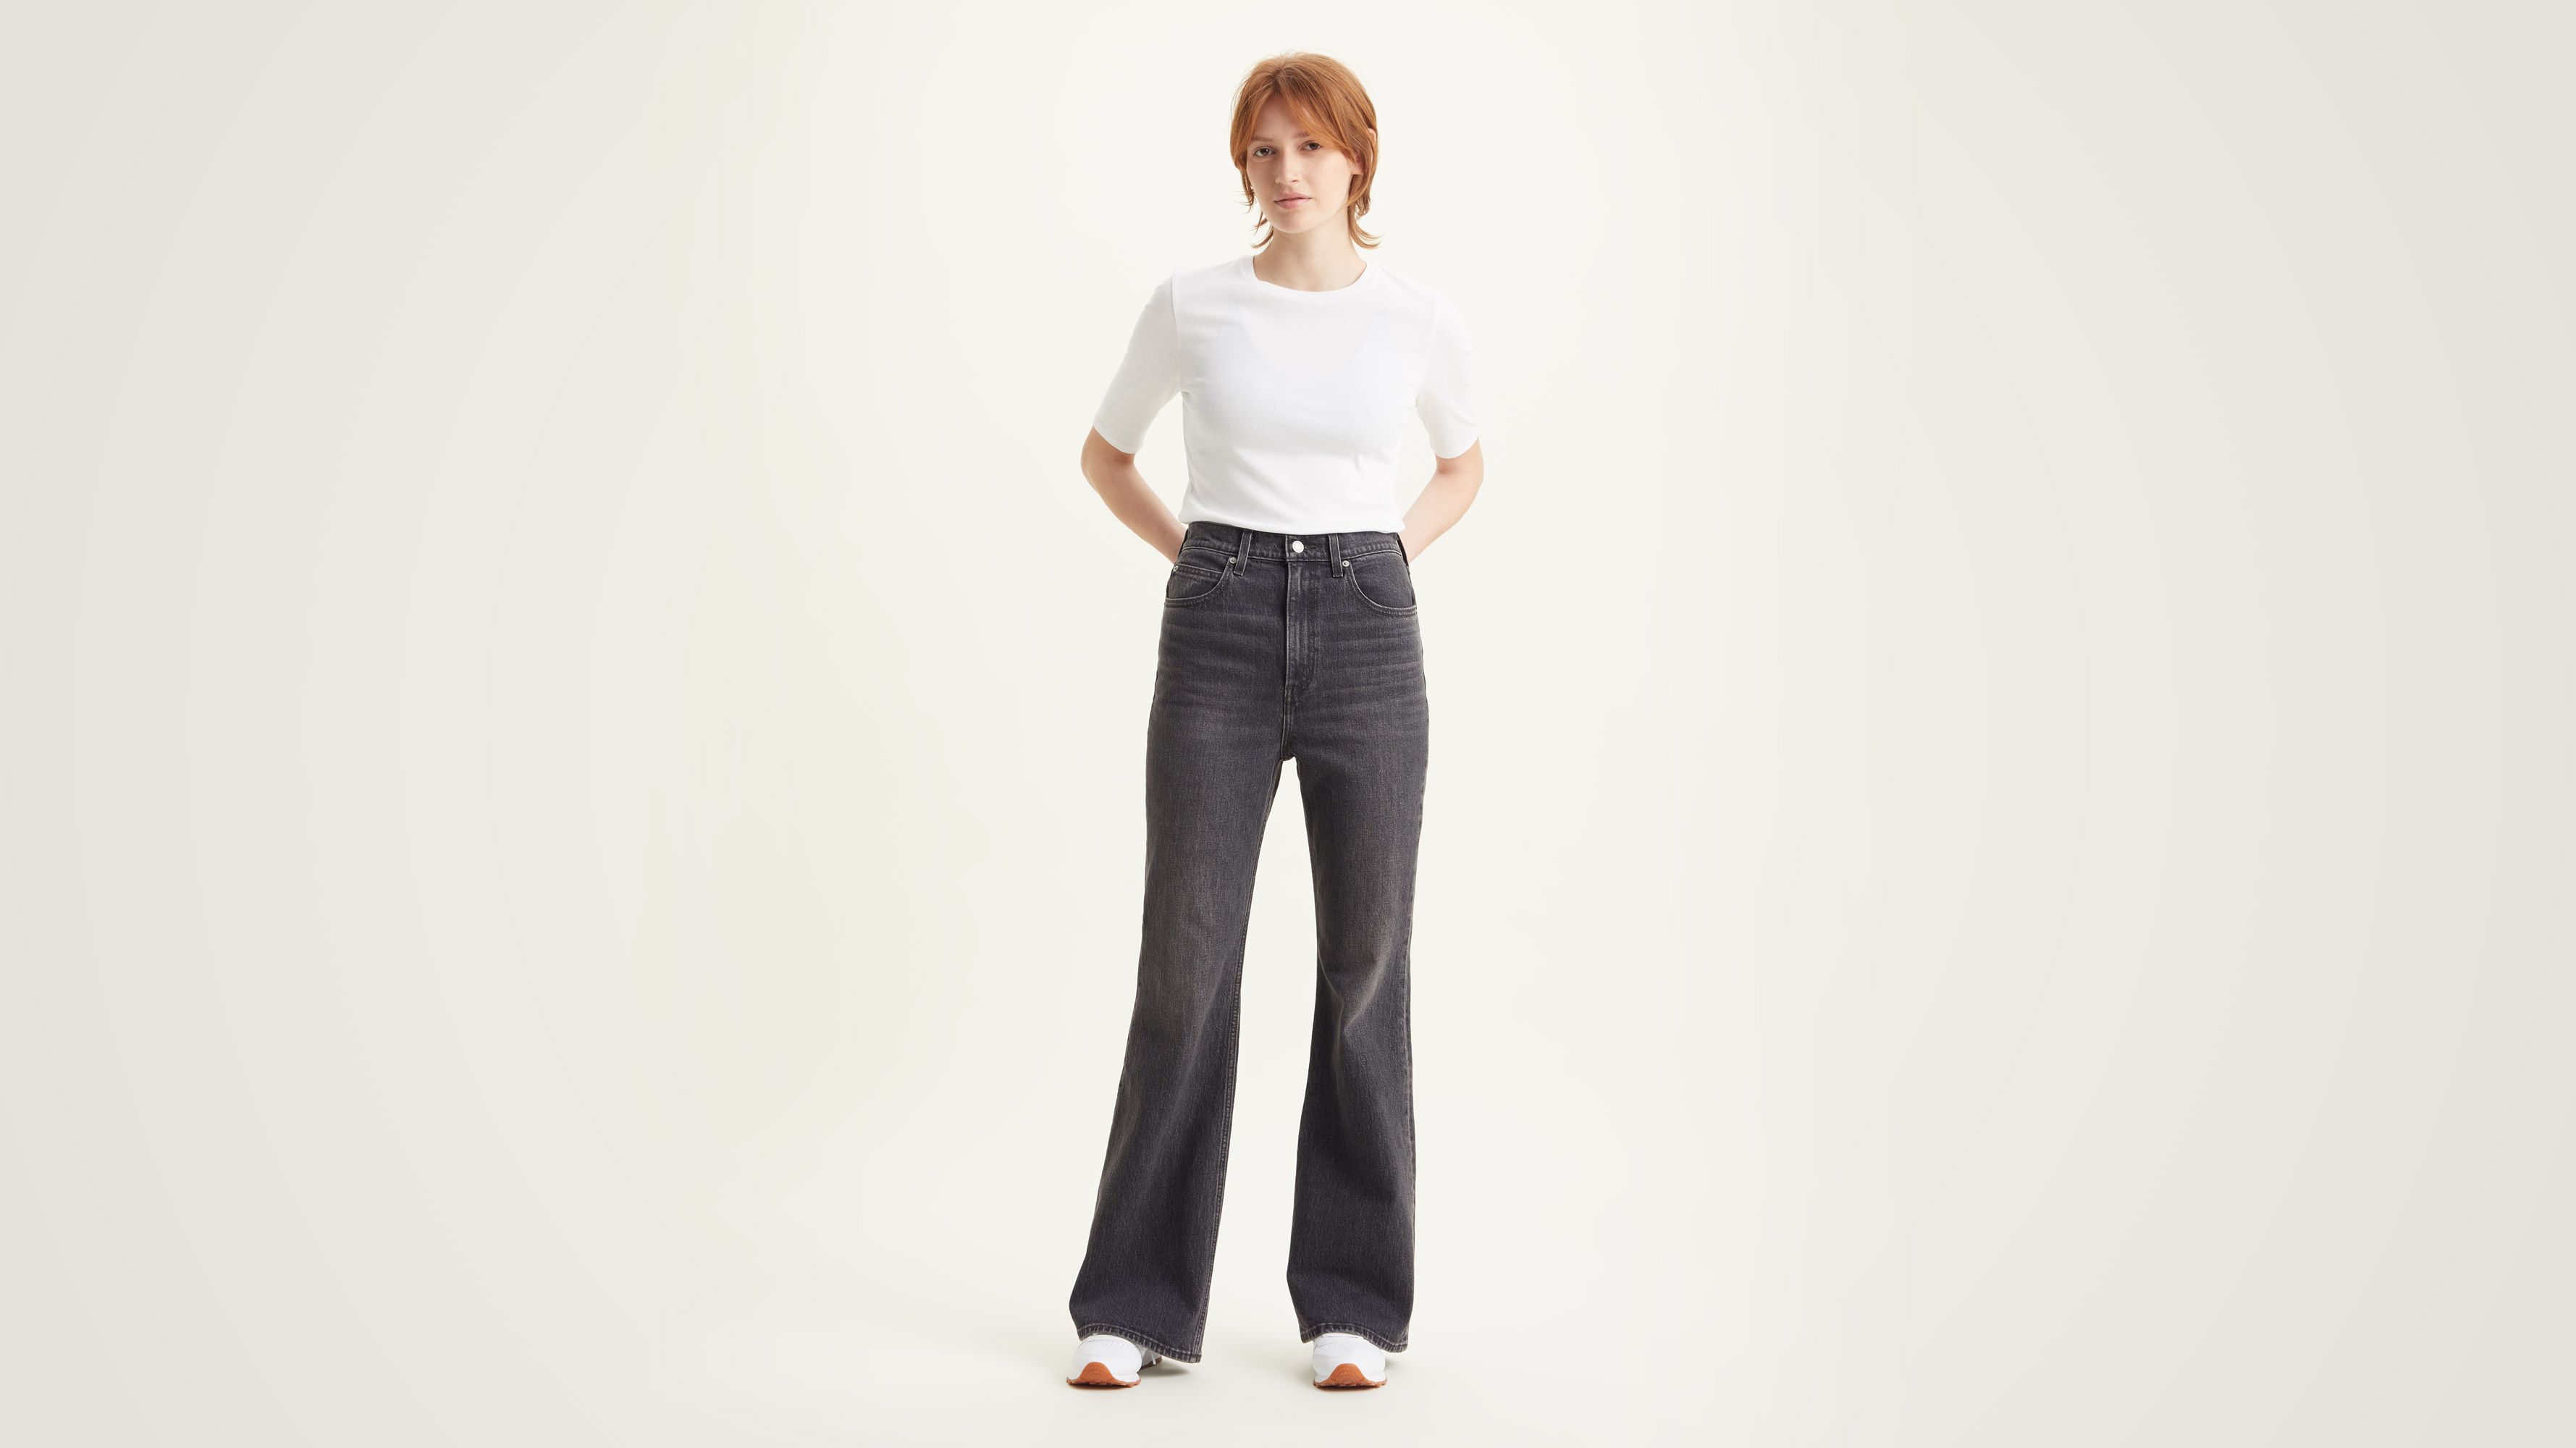 Levi's 70s High Flare Jeans Levis